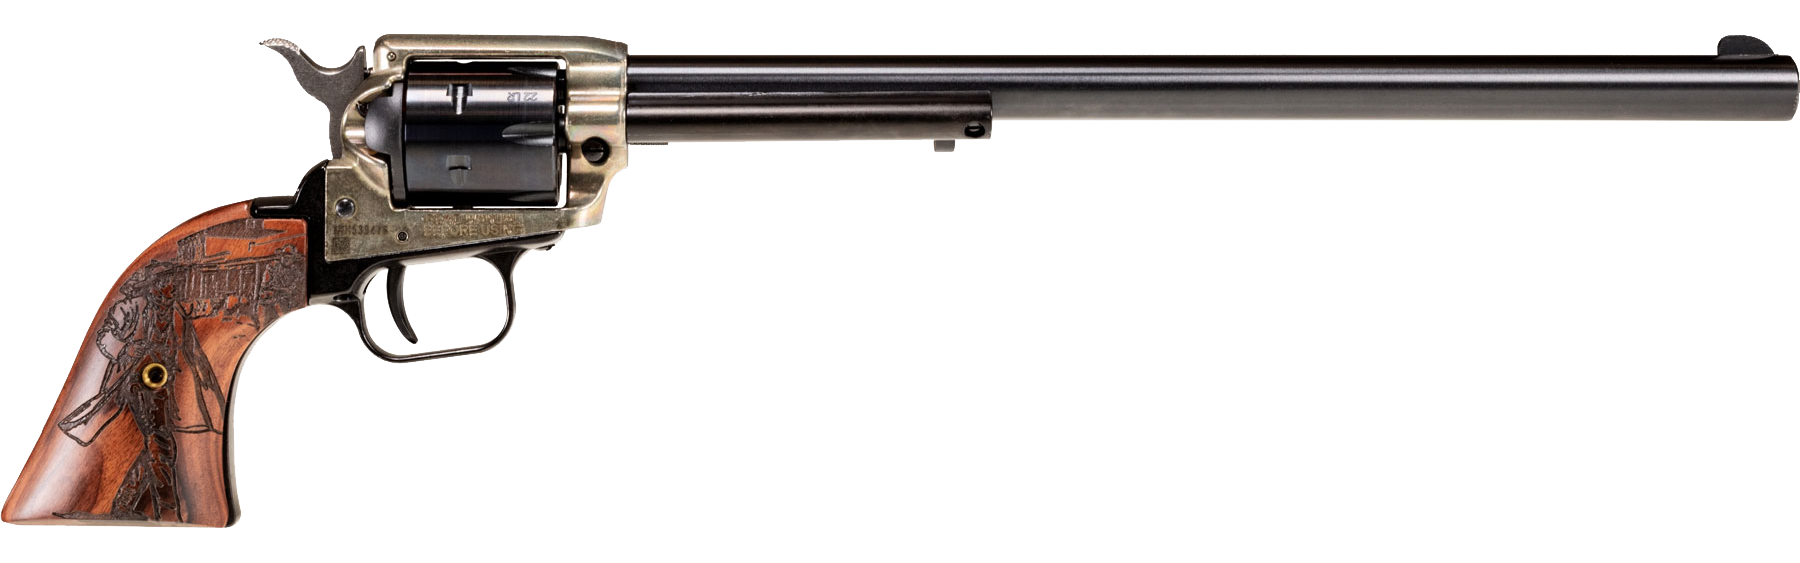 12" Rough Rider® .22 LR, Simulated Case Hardened, 6 Rounds, Wyat Earp Wood Grip